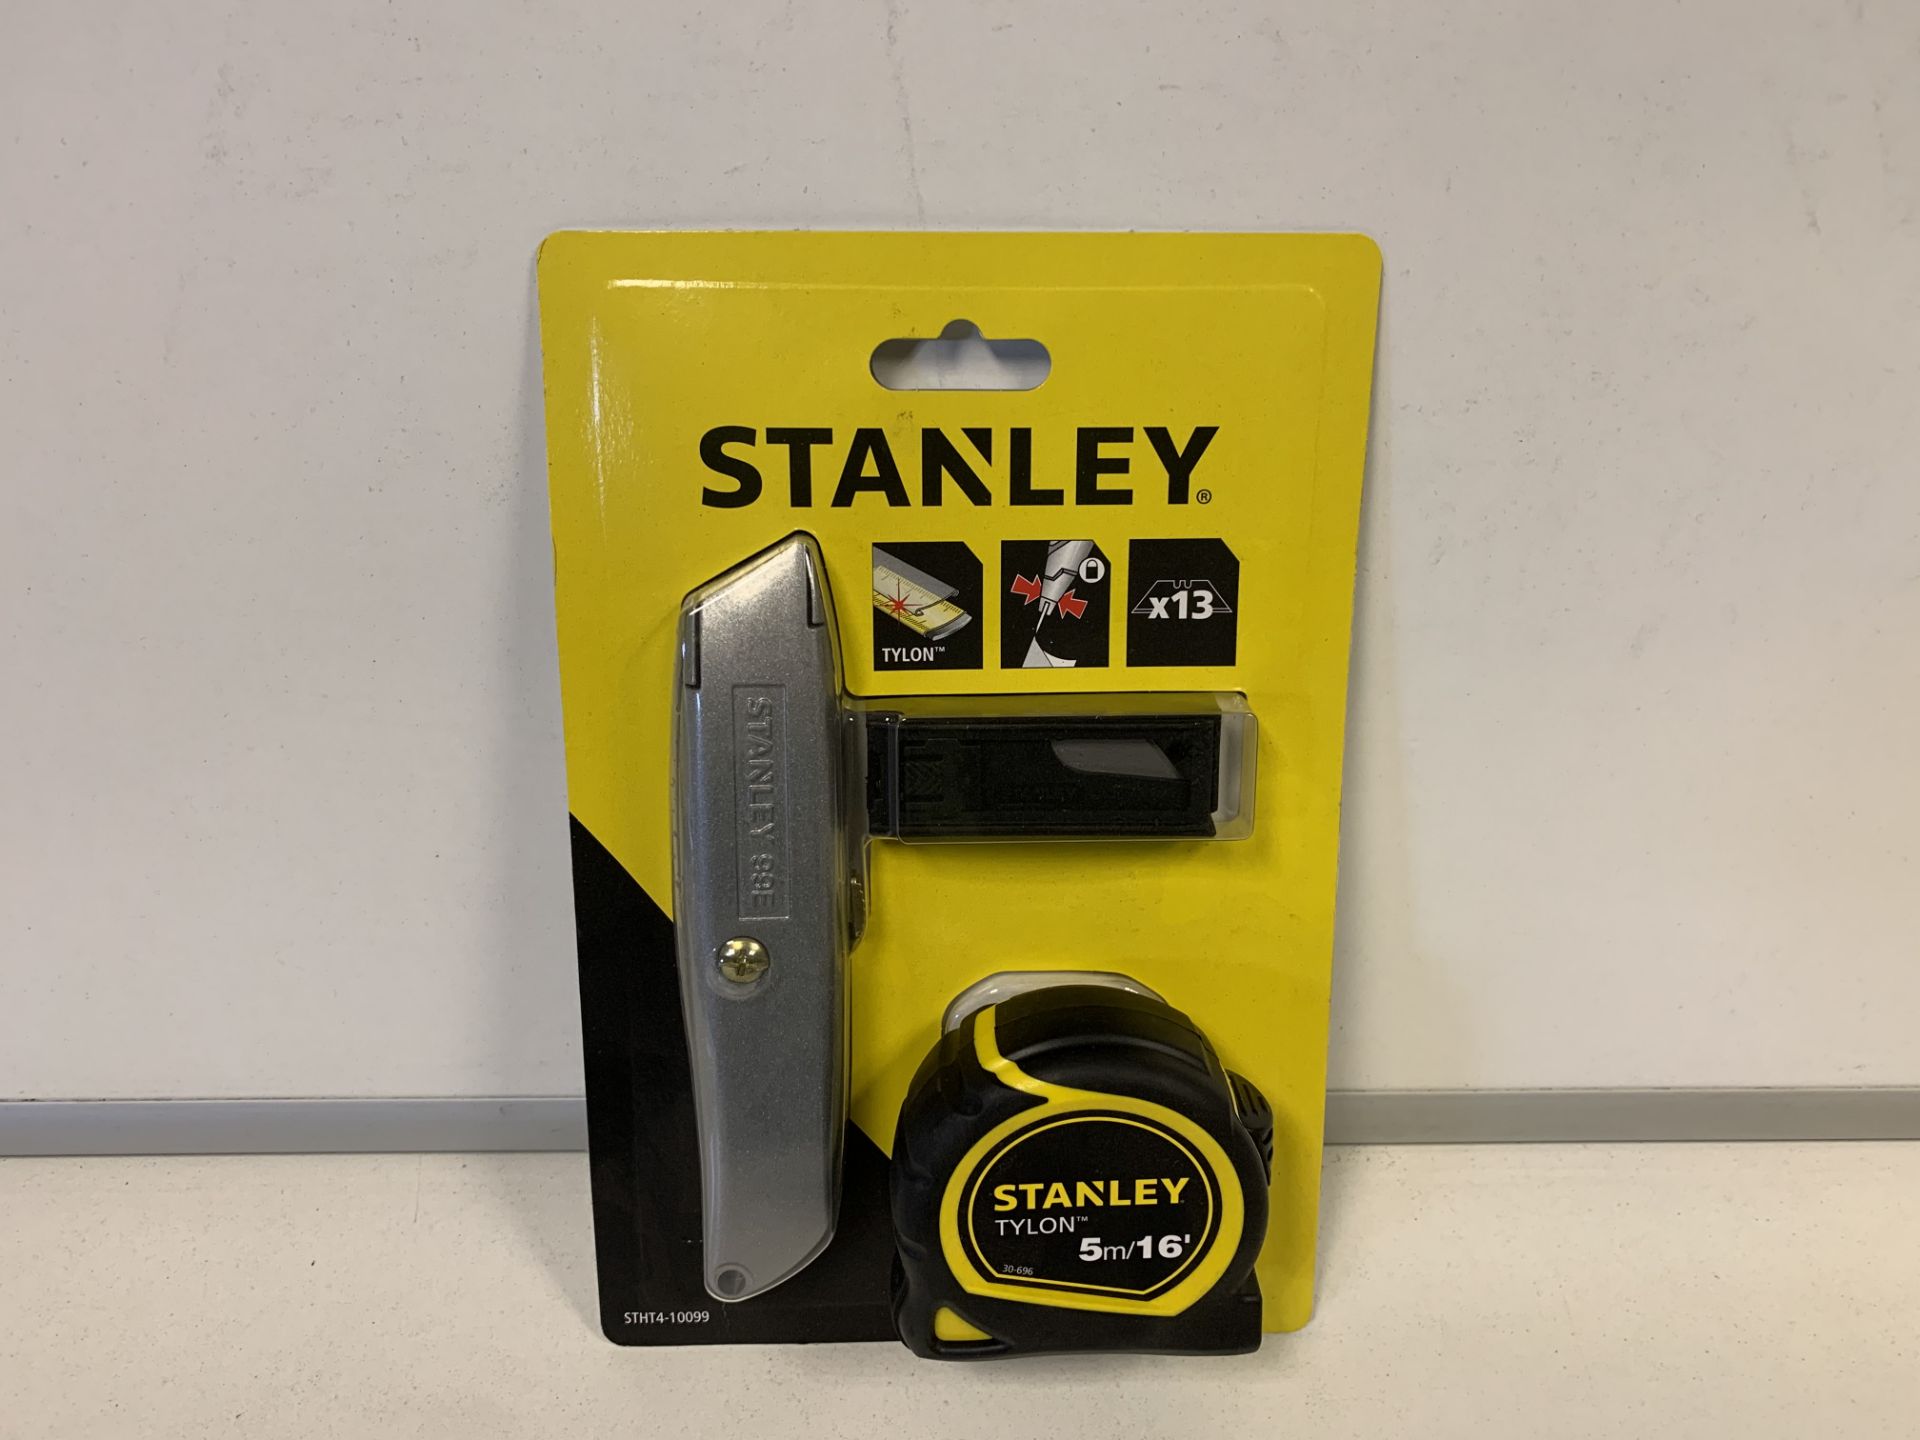 6 x NEW STANLEY SETS EACH SET INCLUDES: STANLEY KNIFE, 5M TAPE MEASURE & 13 REPLACEMENT STANLEY